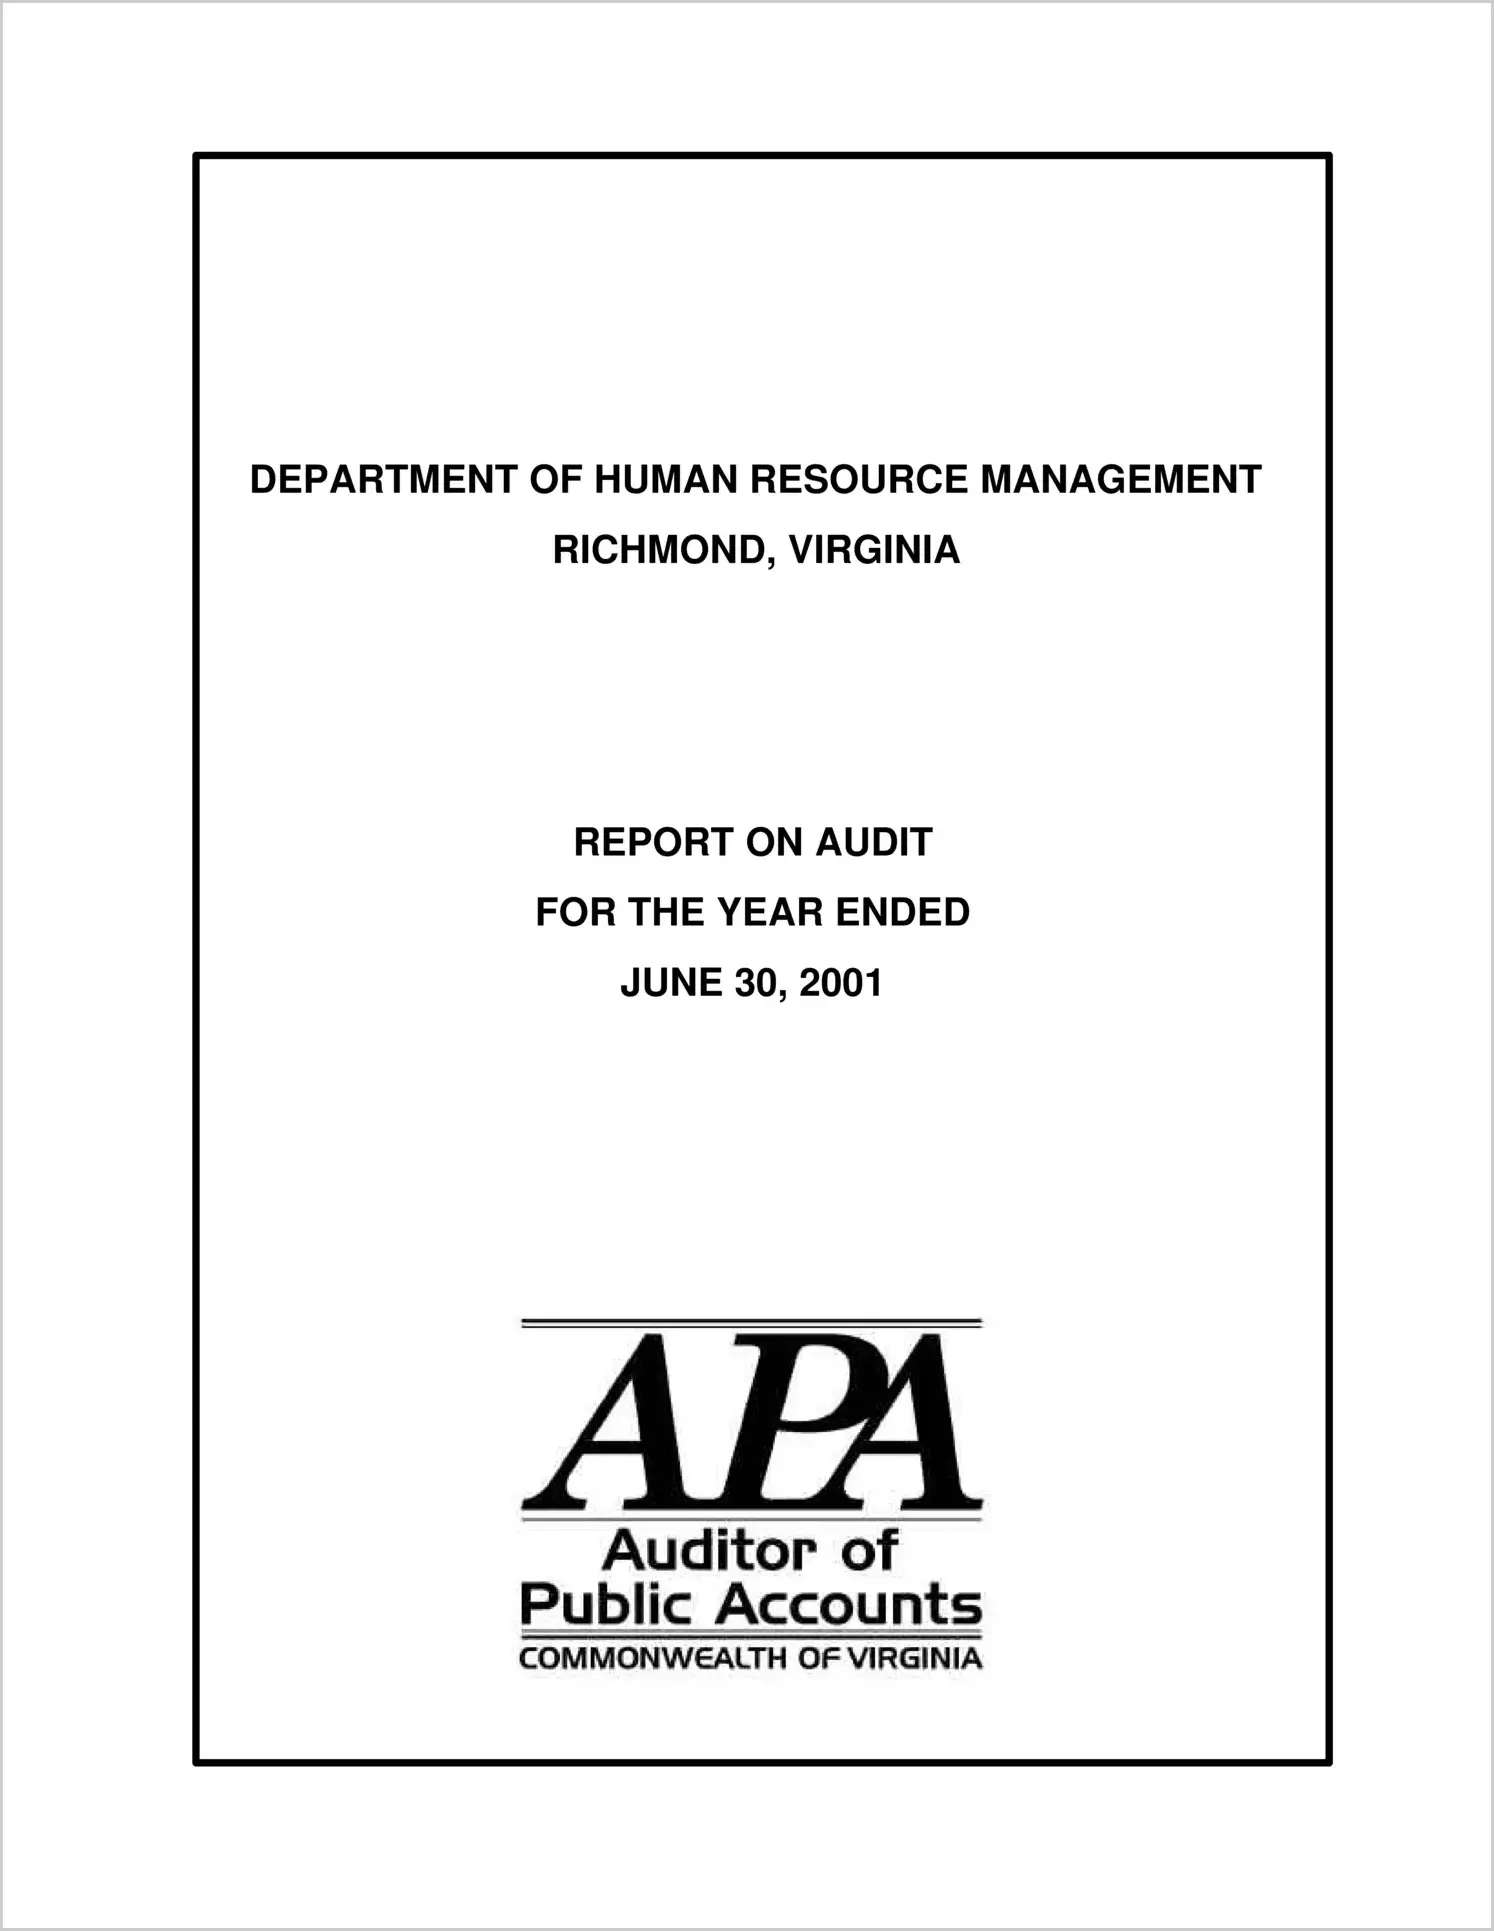 Department of Human Resource Management for the year ended June 30, 2001